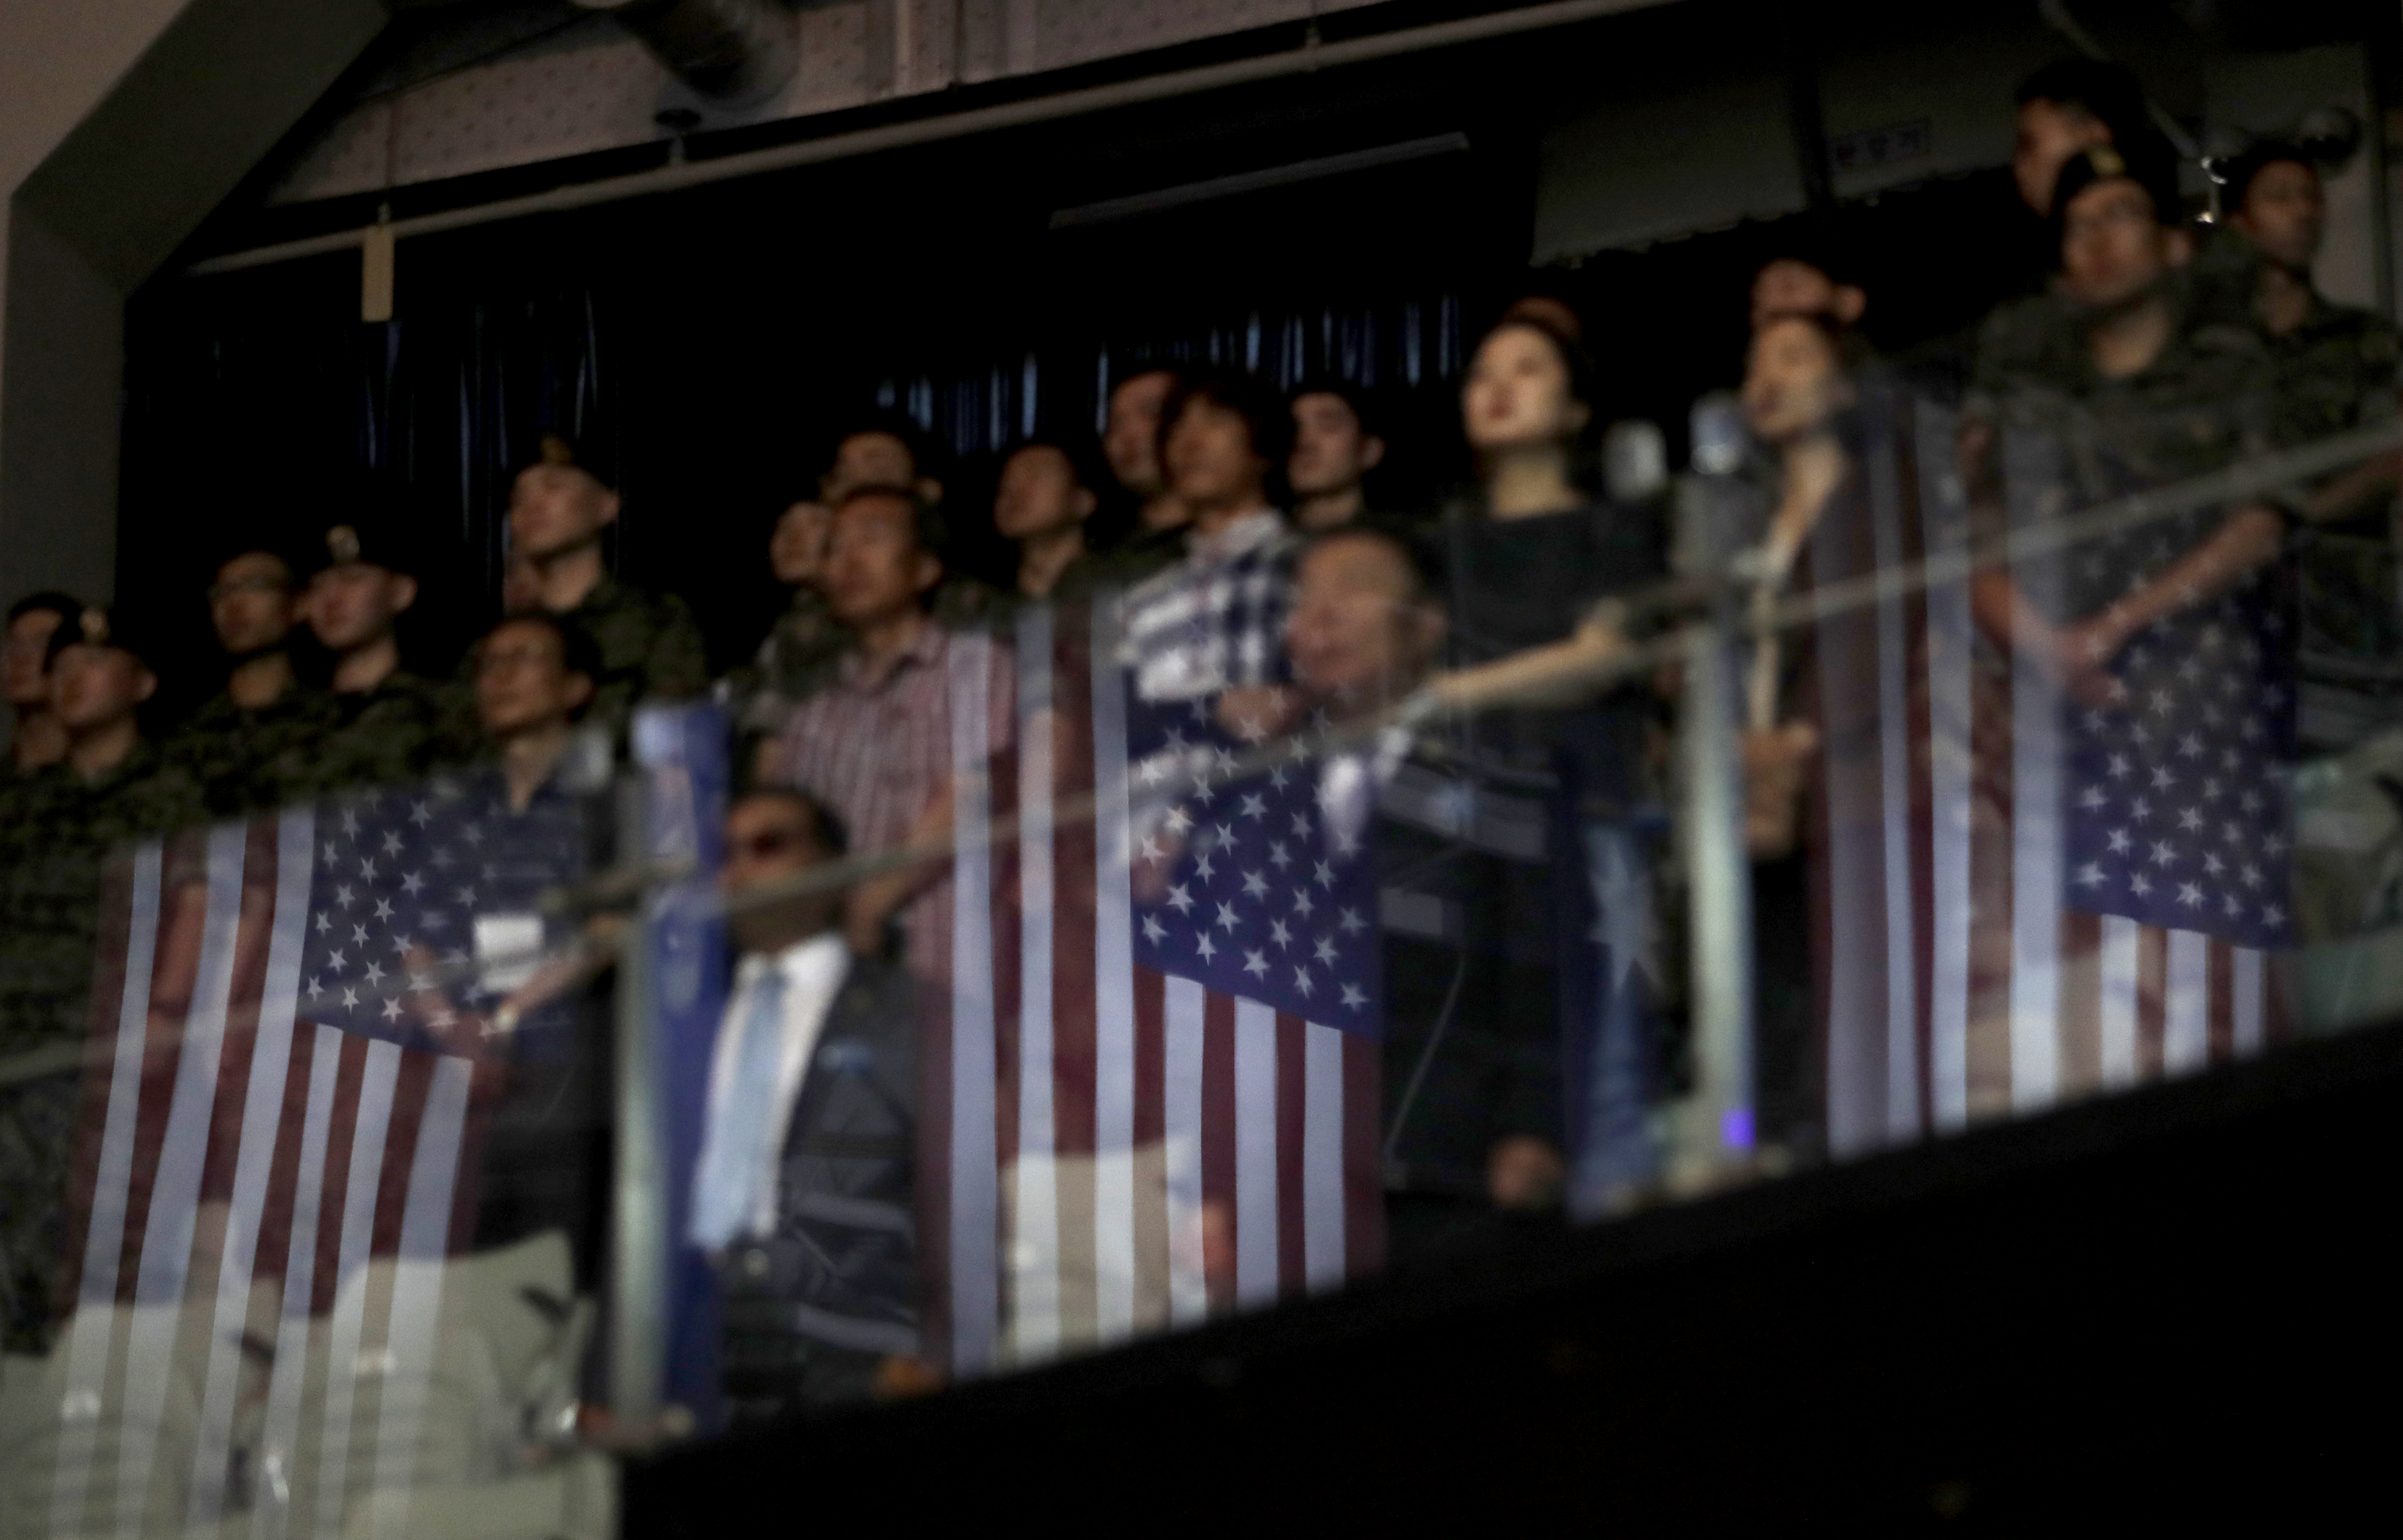 U.S. flags are reflected on the glass as participants stand during a ceremony to mark the 69th anniversary of the outbreak of the Korean War in Seoul, South Korea, Tuesday, June 25, 2019. South Korea and North Korea fought a devastating three-year war in the early 1950s that ended with an armistice, not a peace treaty. (AP Photo/Lee Jin-man)